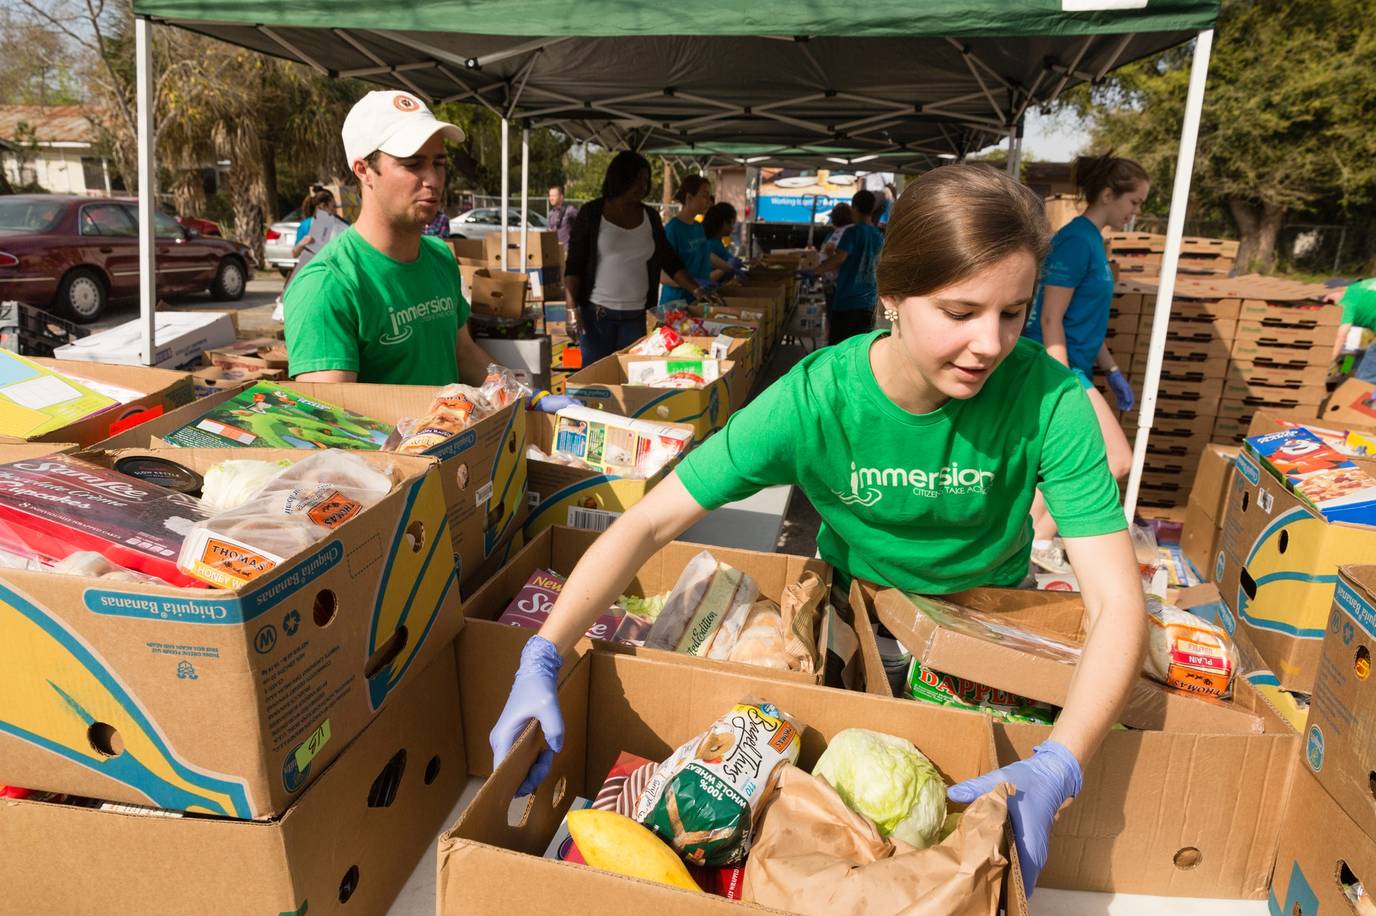 Rollins students help sort food donations into boxes.